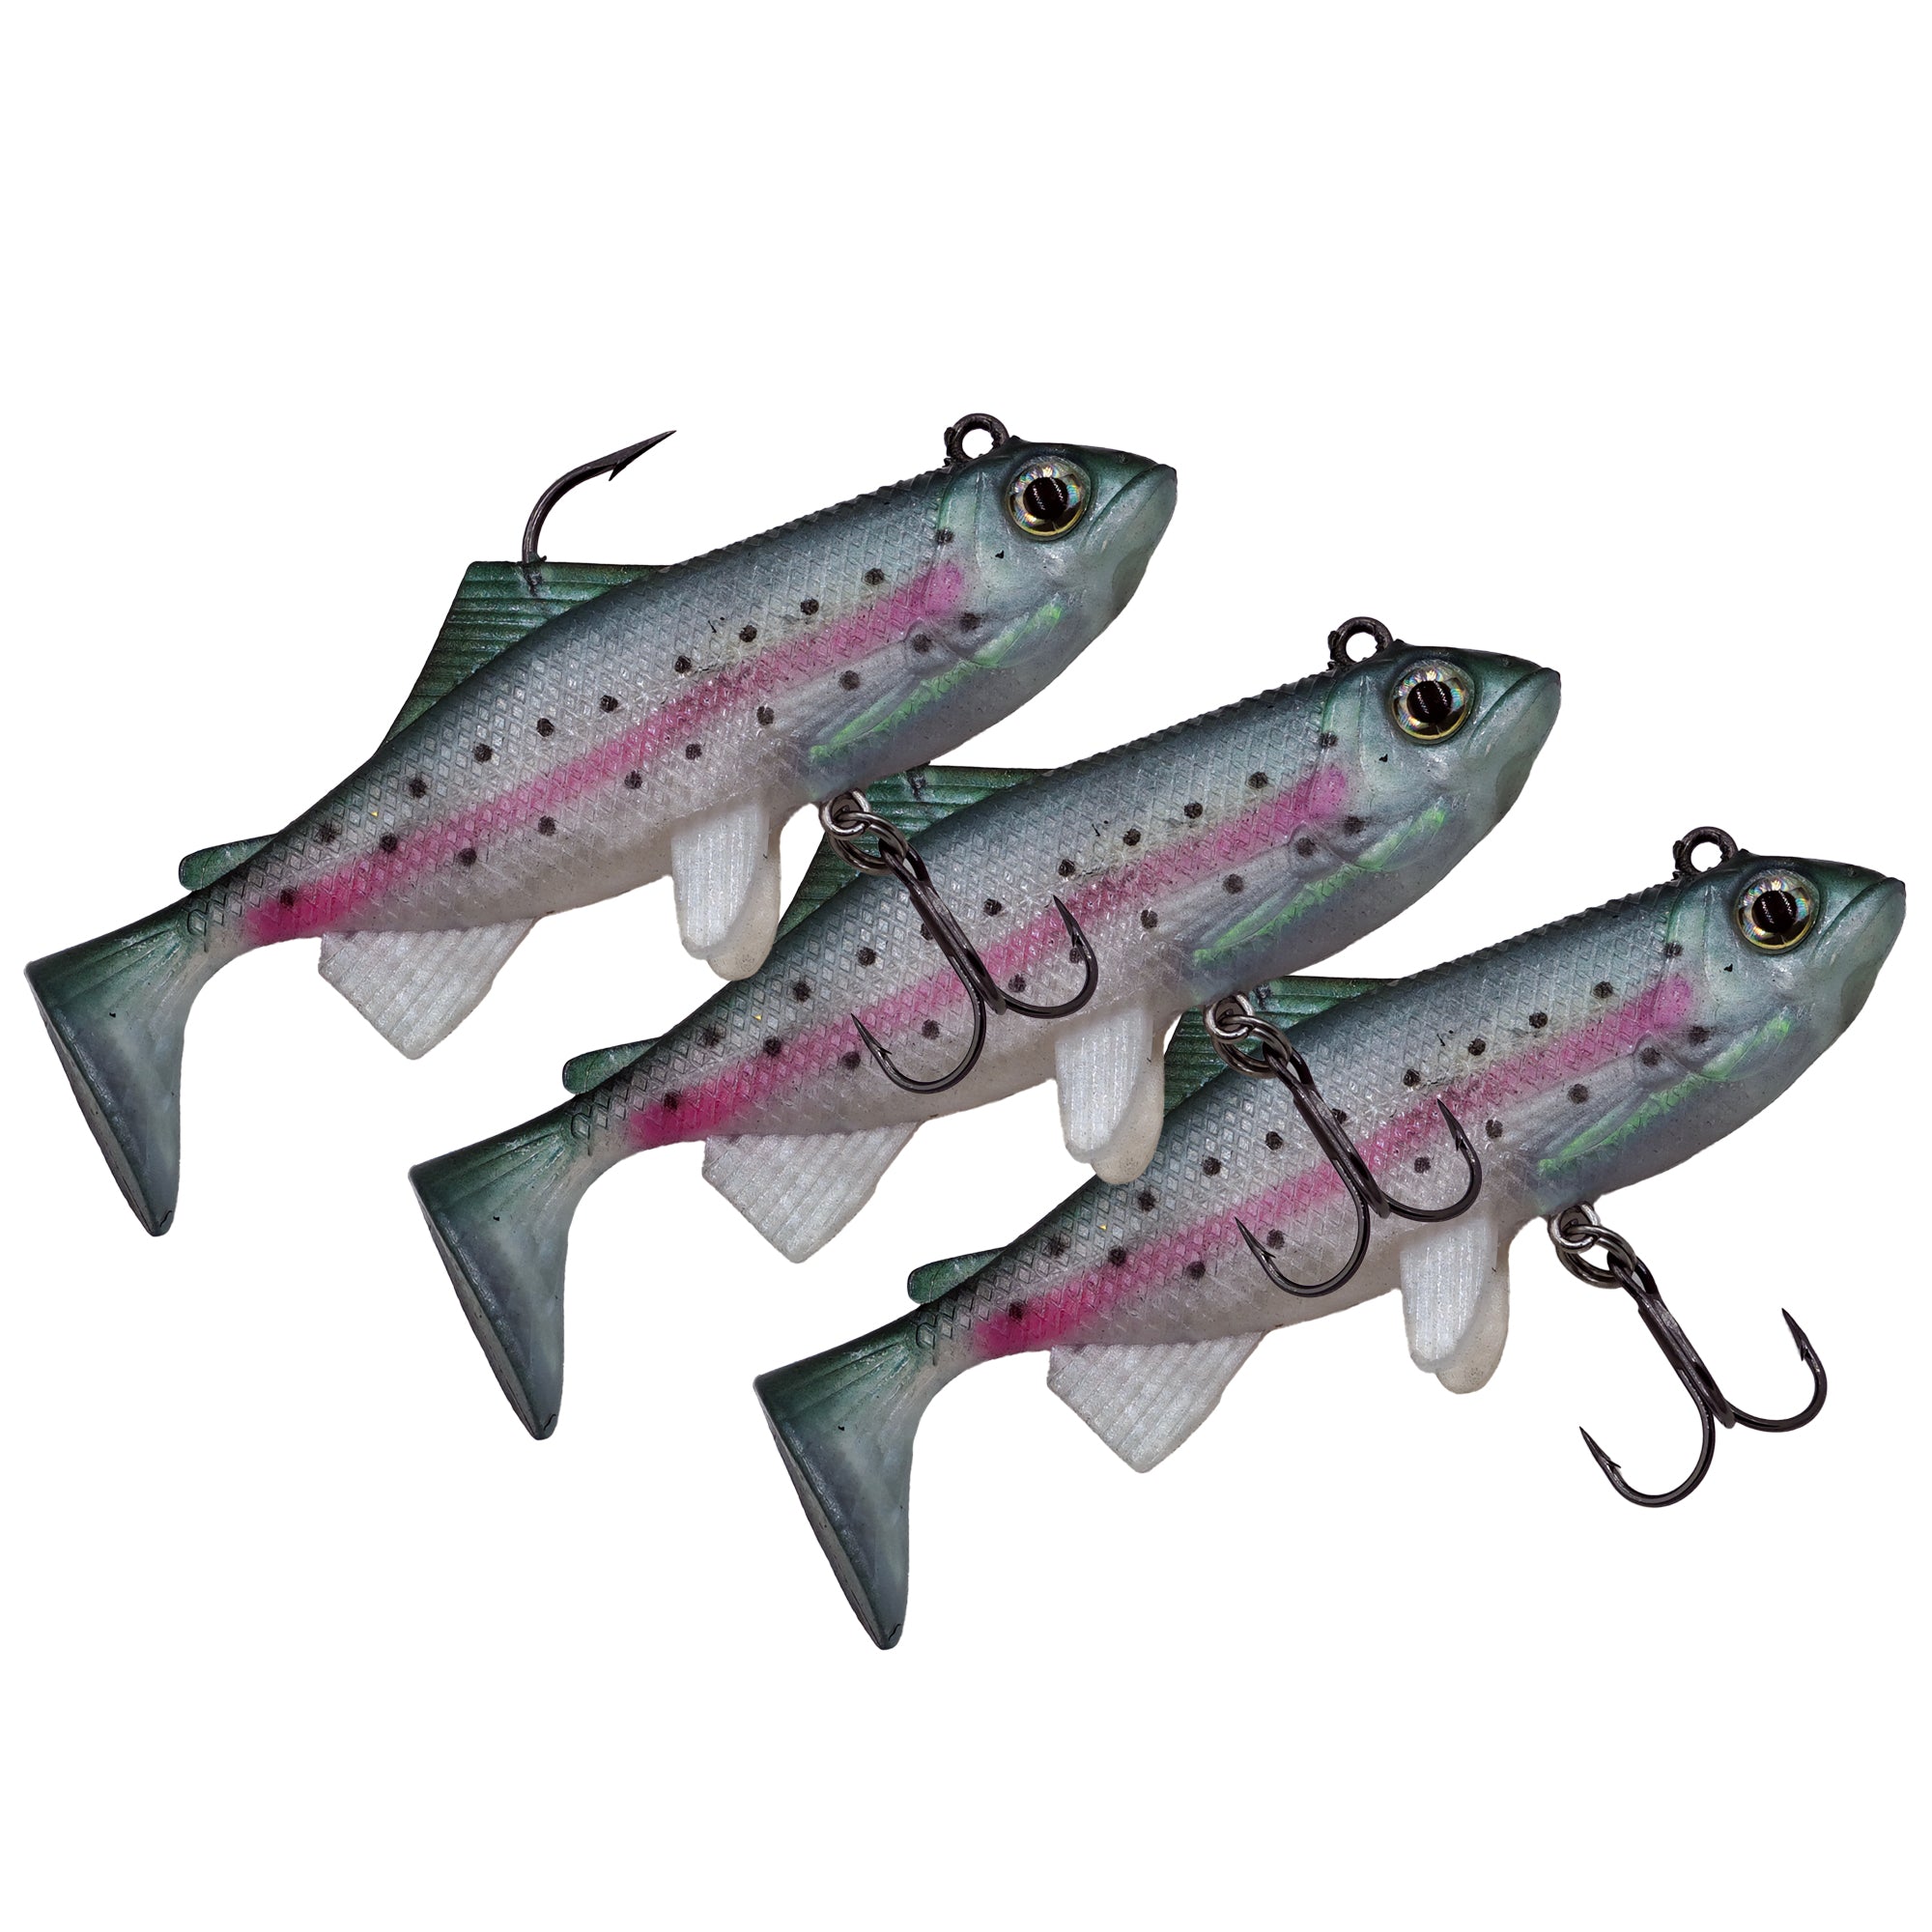 Storm WildEye Live Rainbow Trout Fishing Lures (3-Pack)